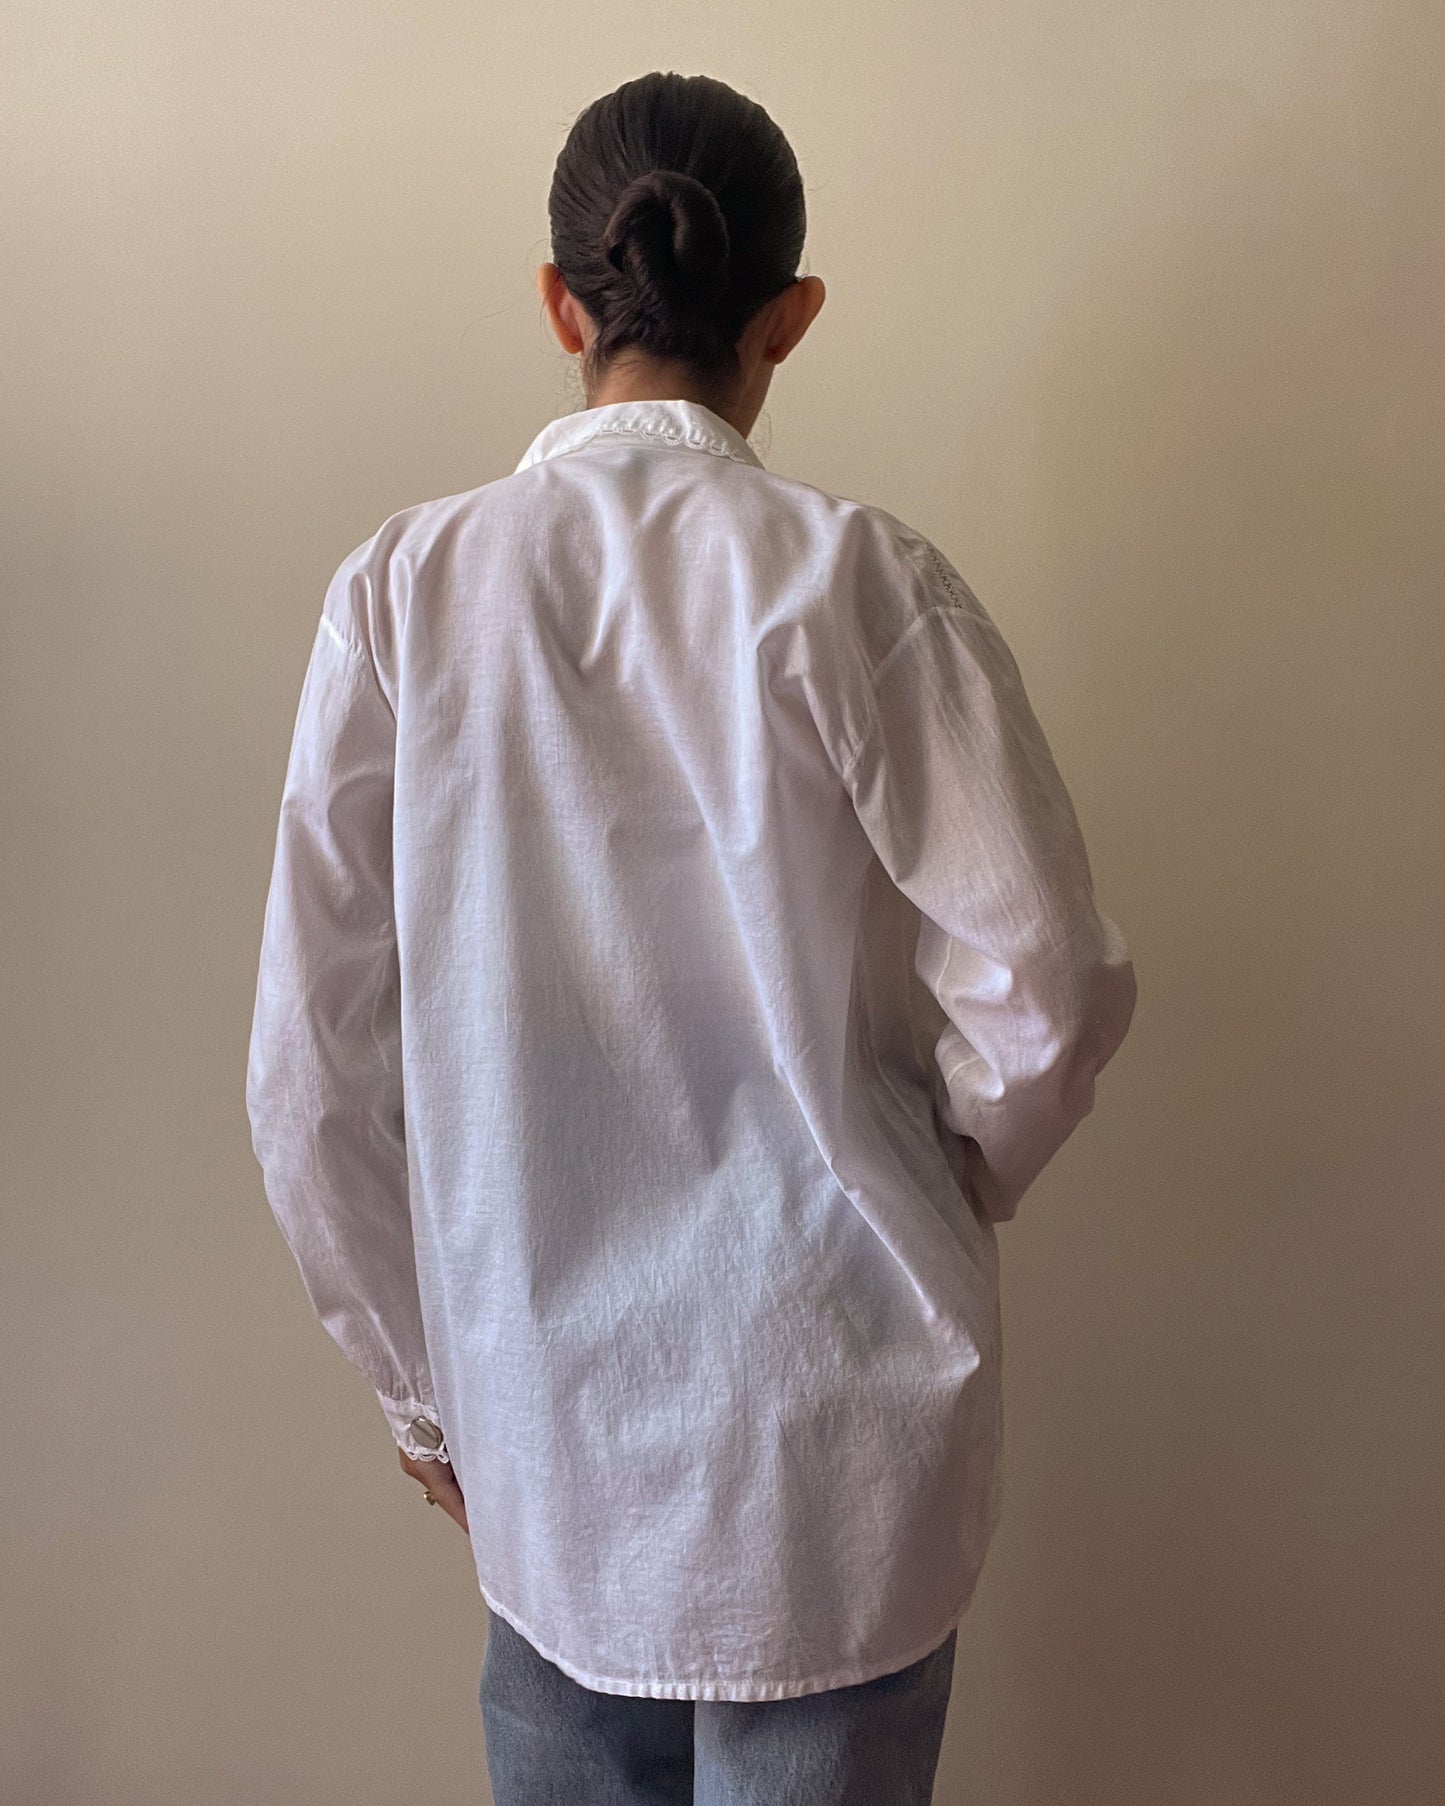 Vintage Cotton Shirt with Cufflink Sleeves